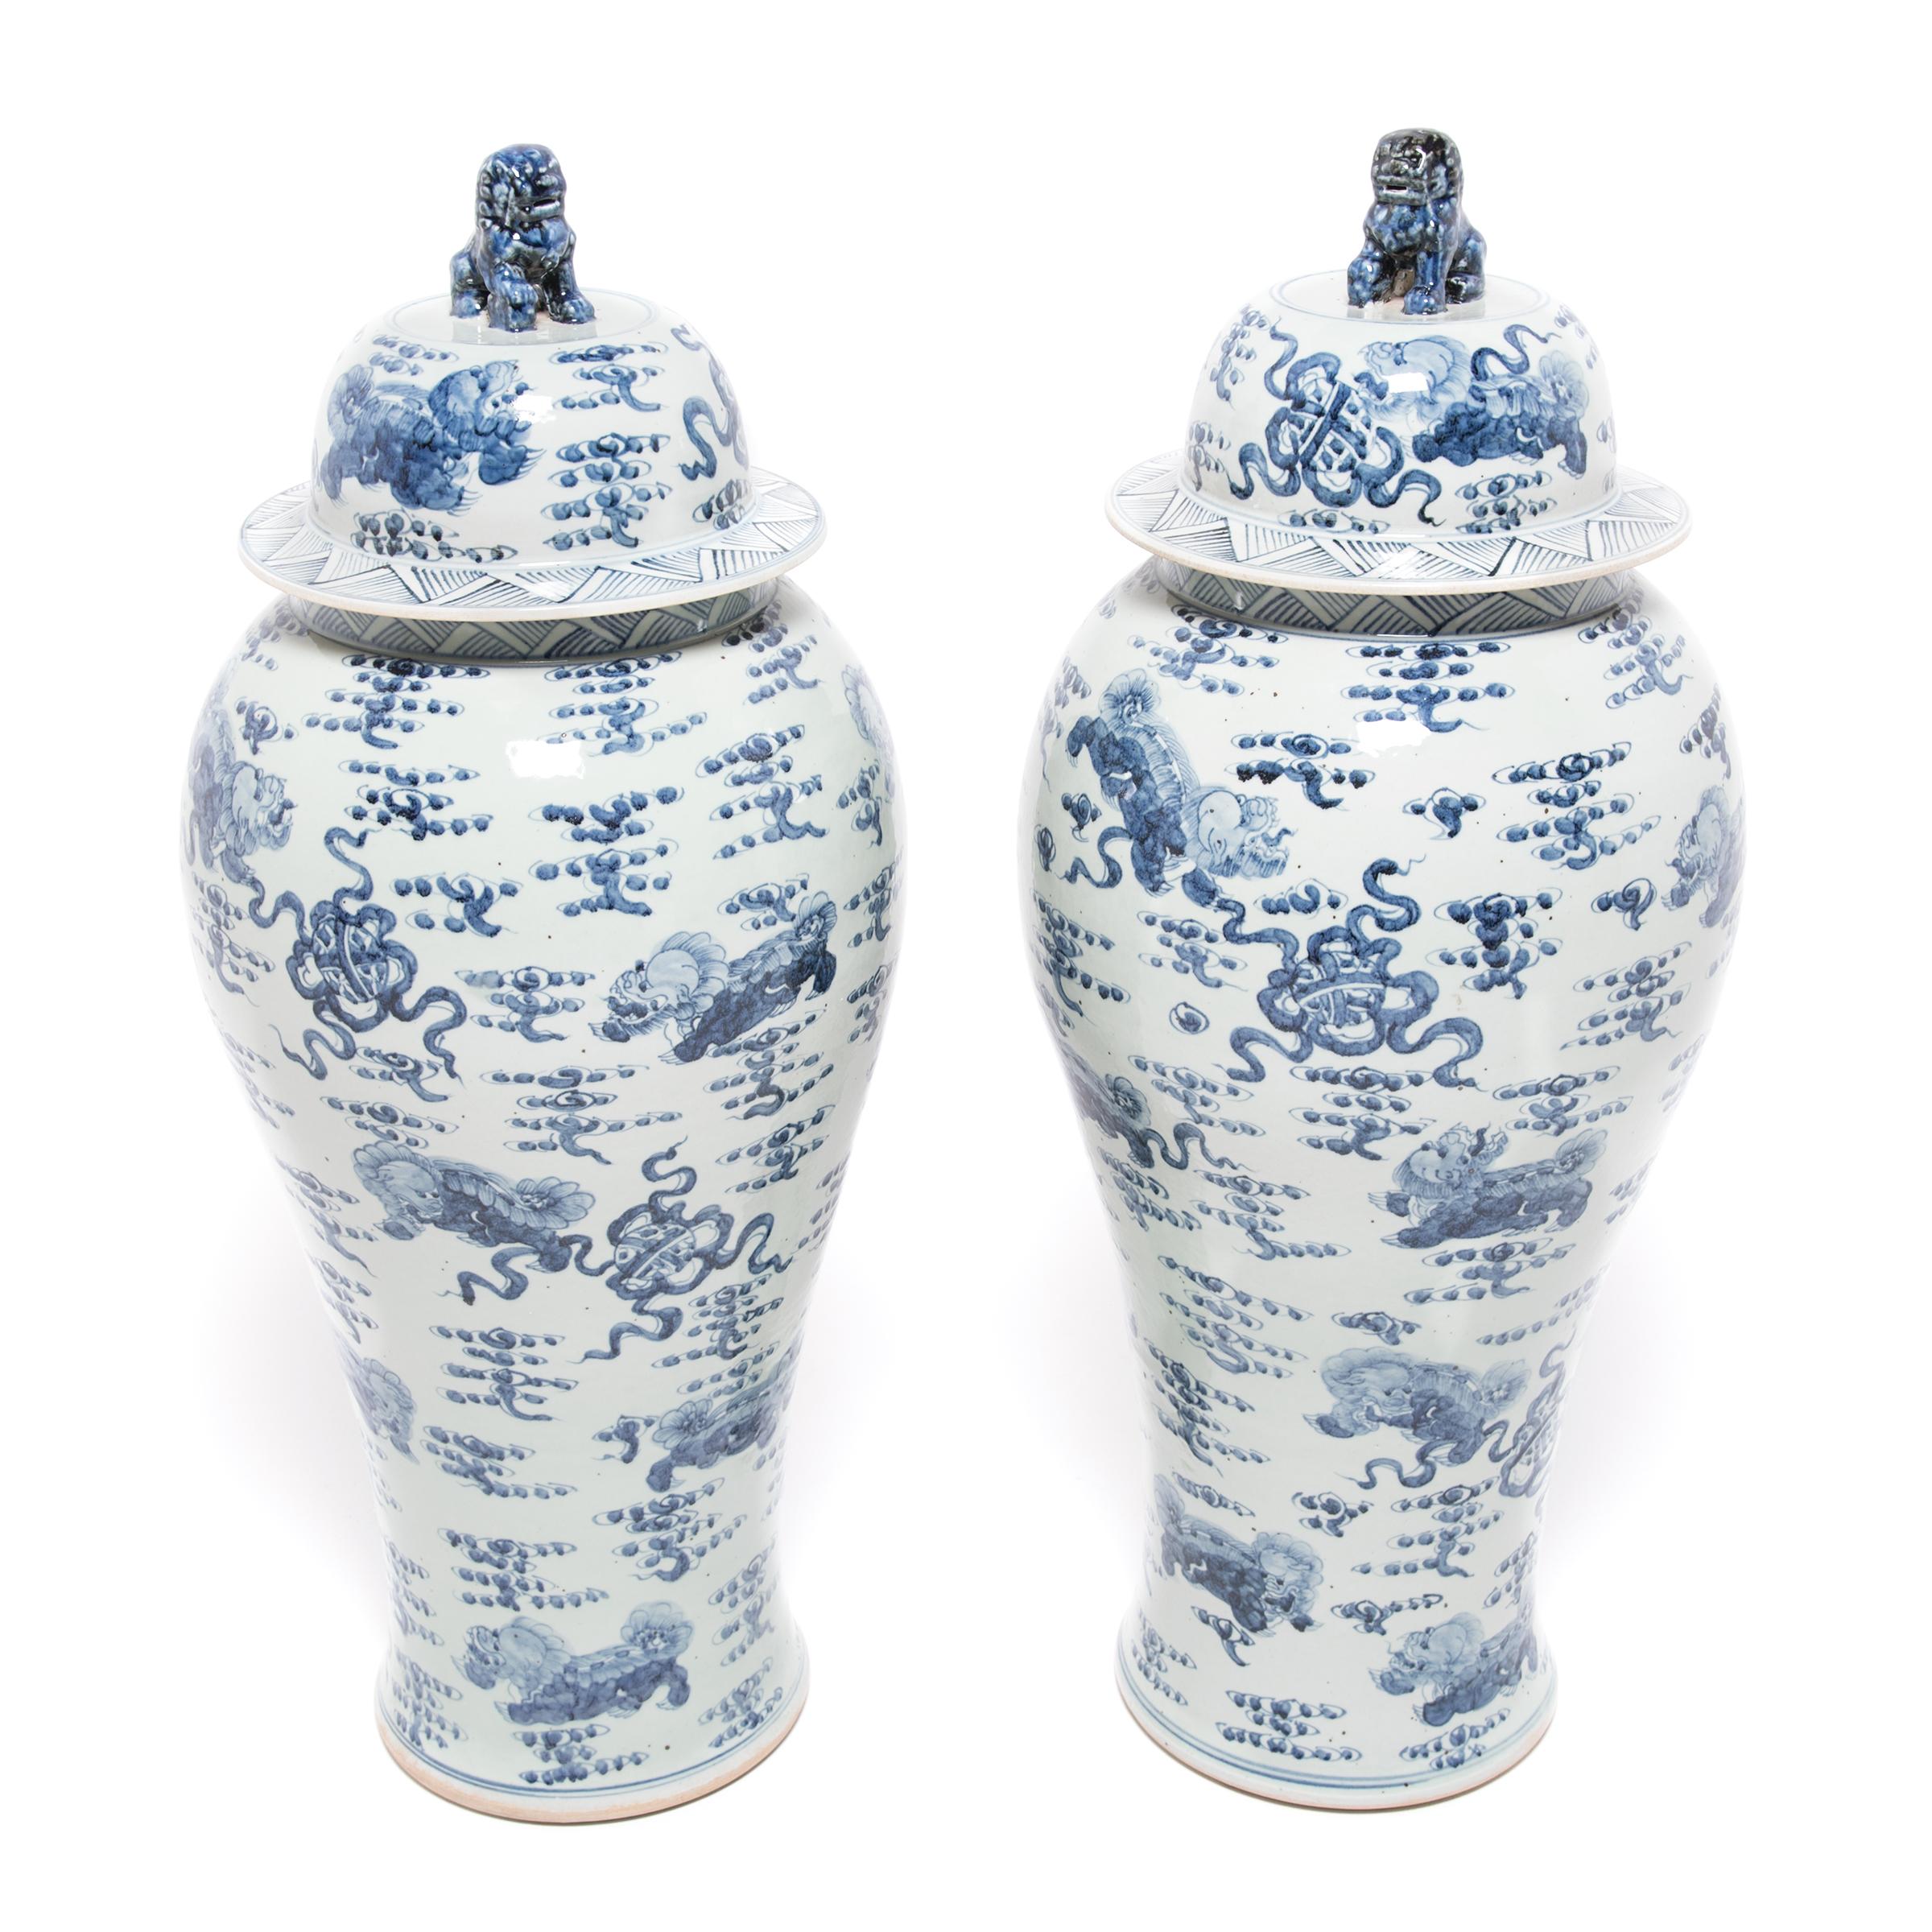 Monumental Chinese Blue and White Qilin Baluster Jar 1